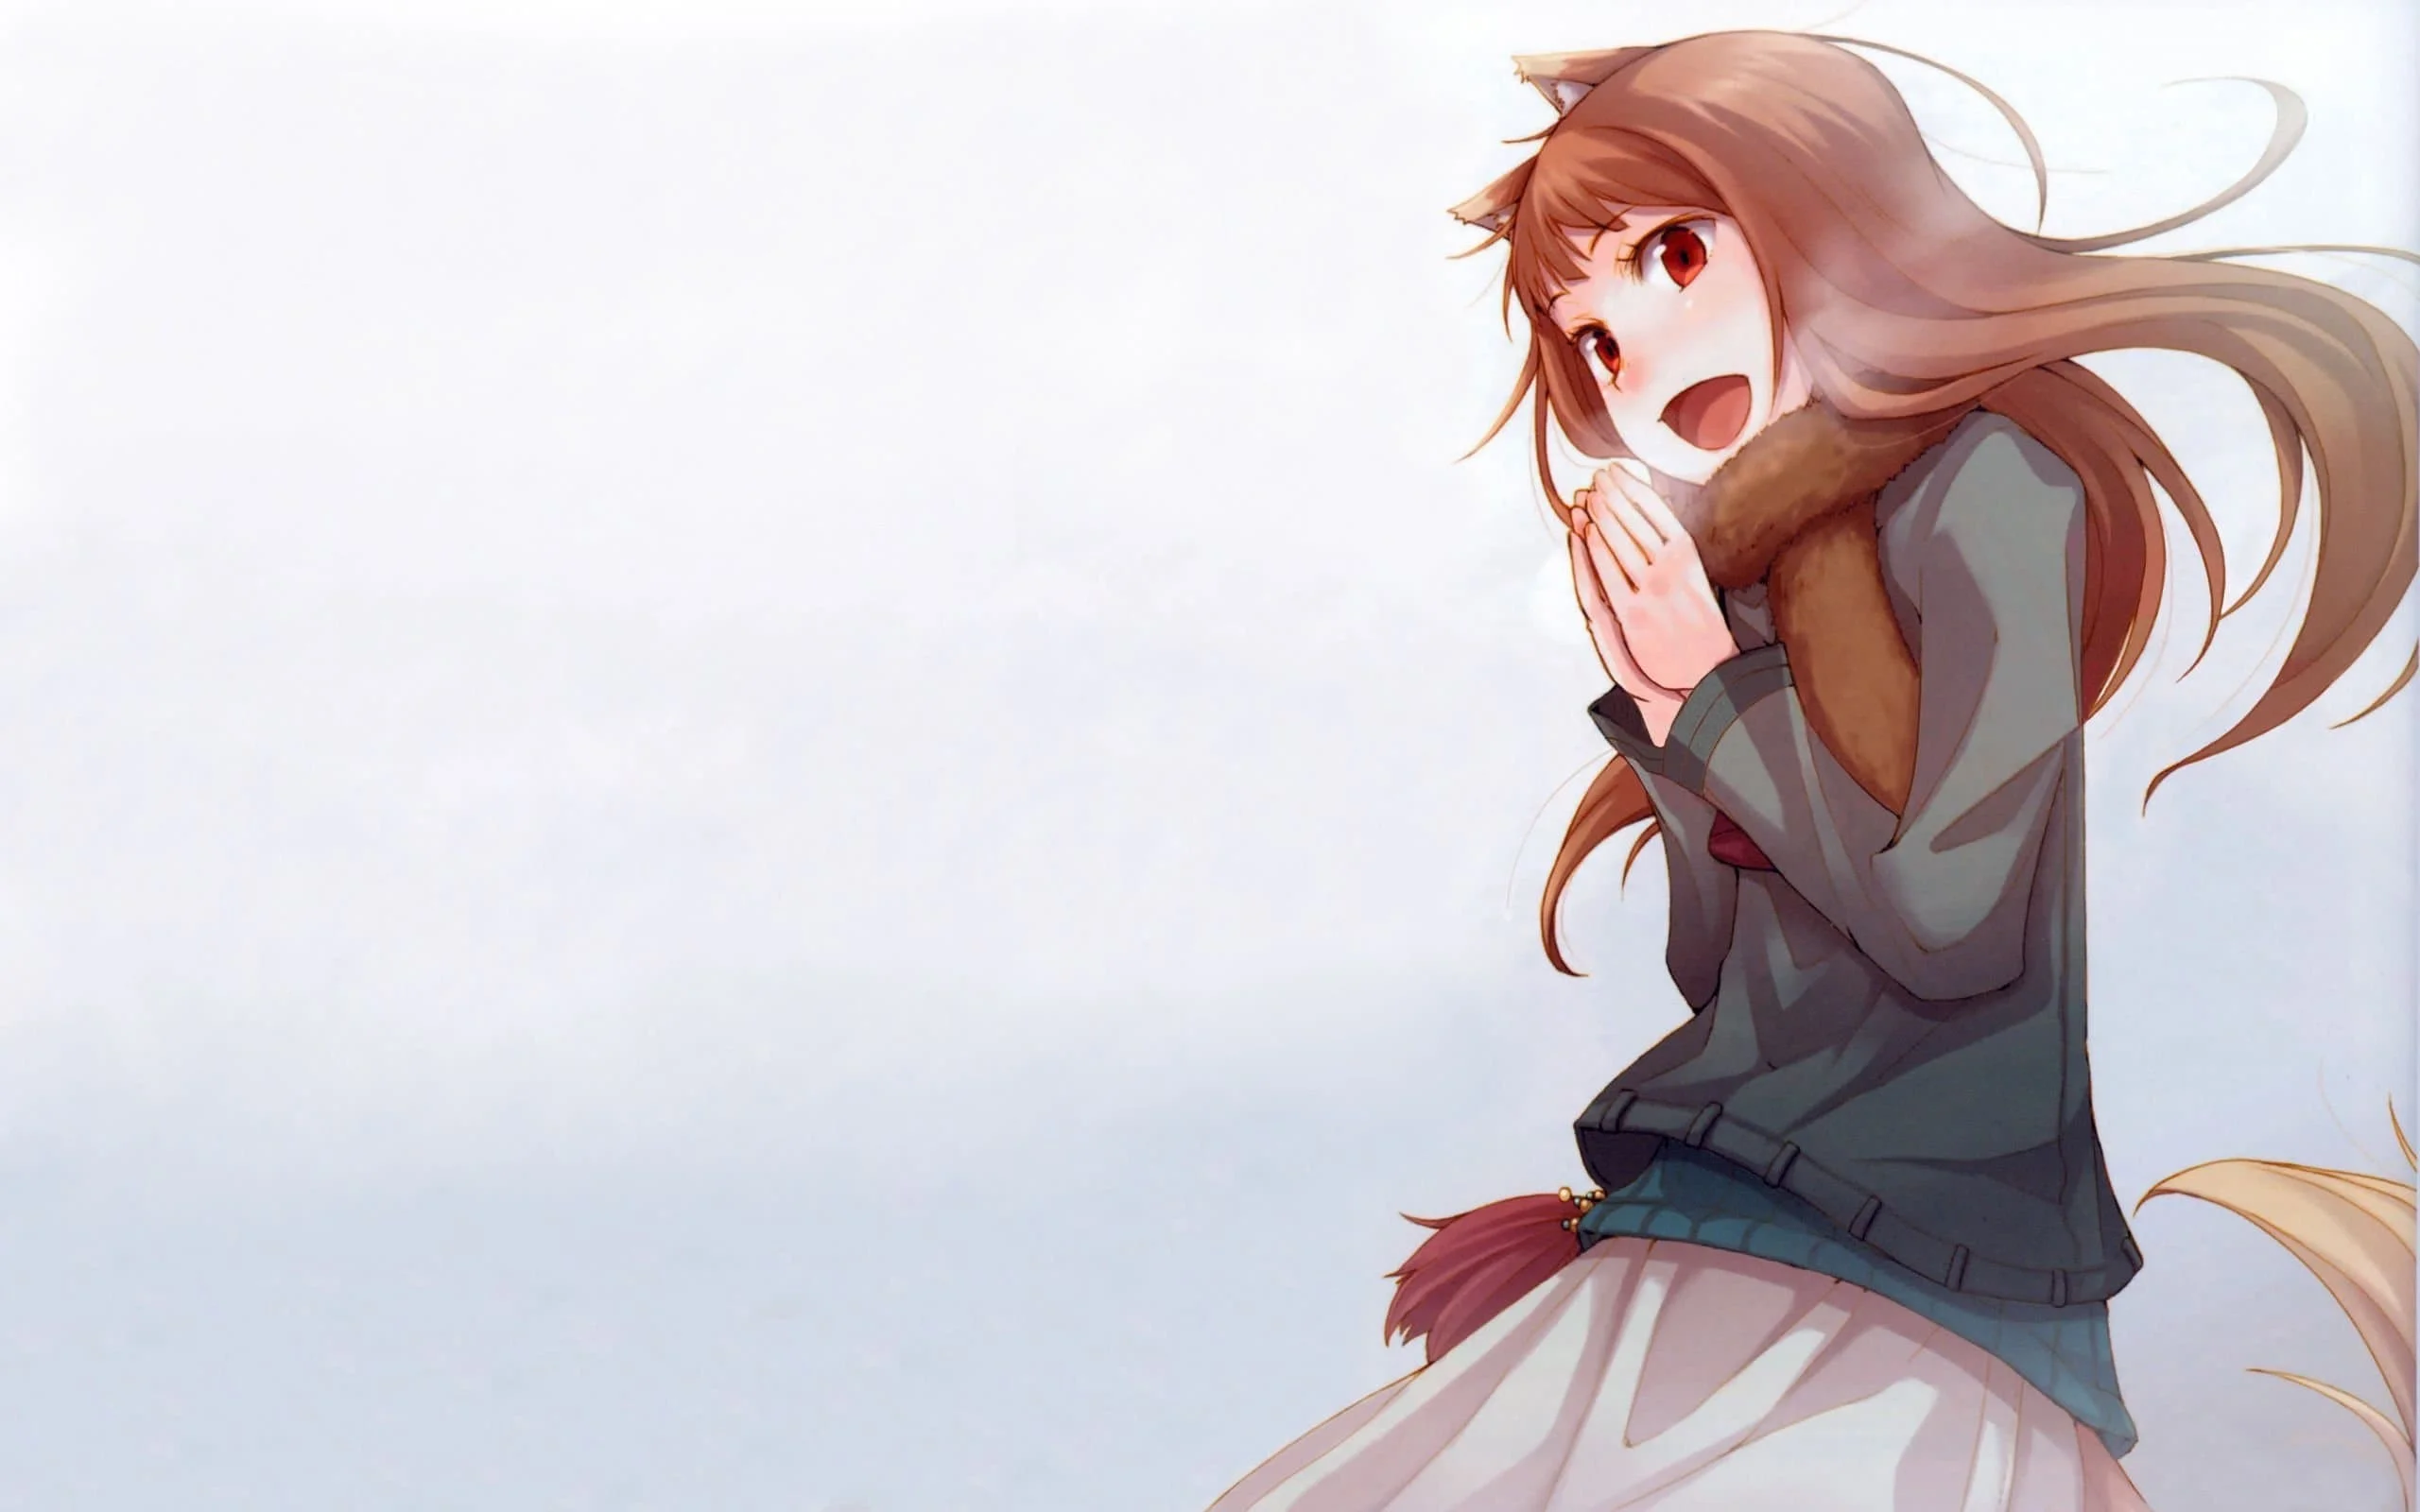 Spice and Wolf – Holo